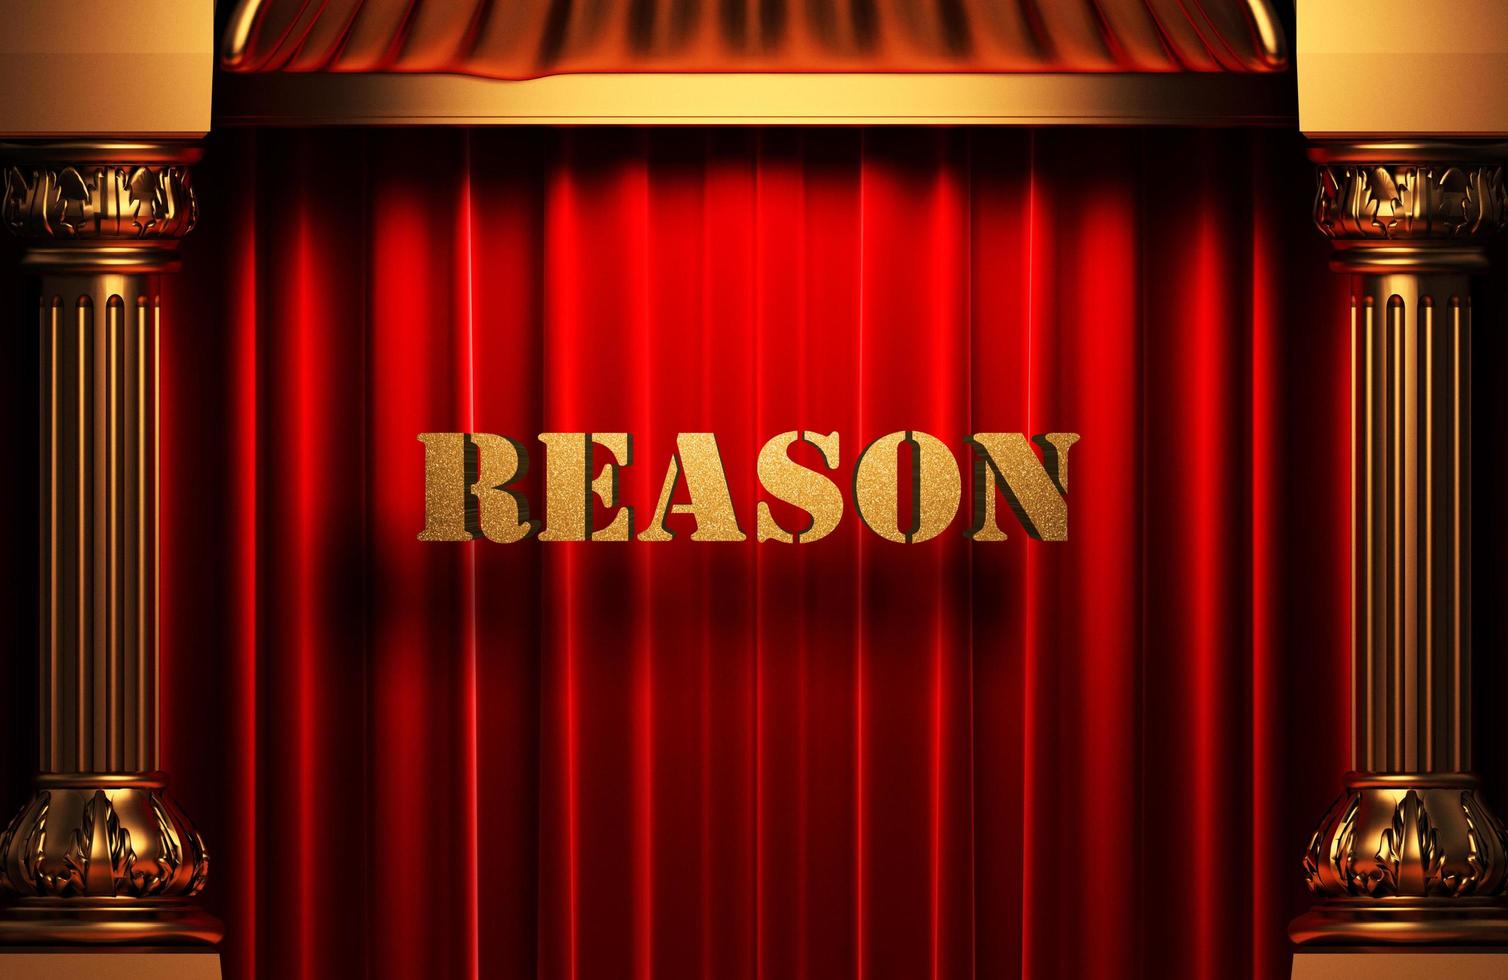 reason golden word on red curtain photo